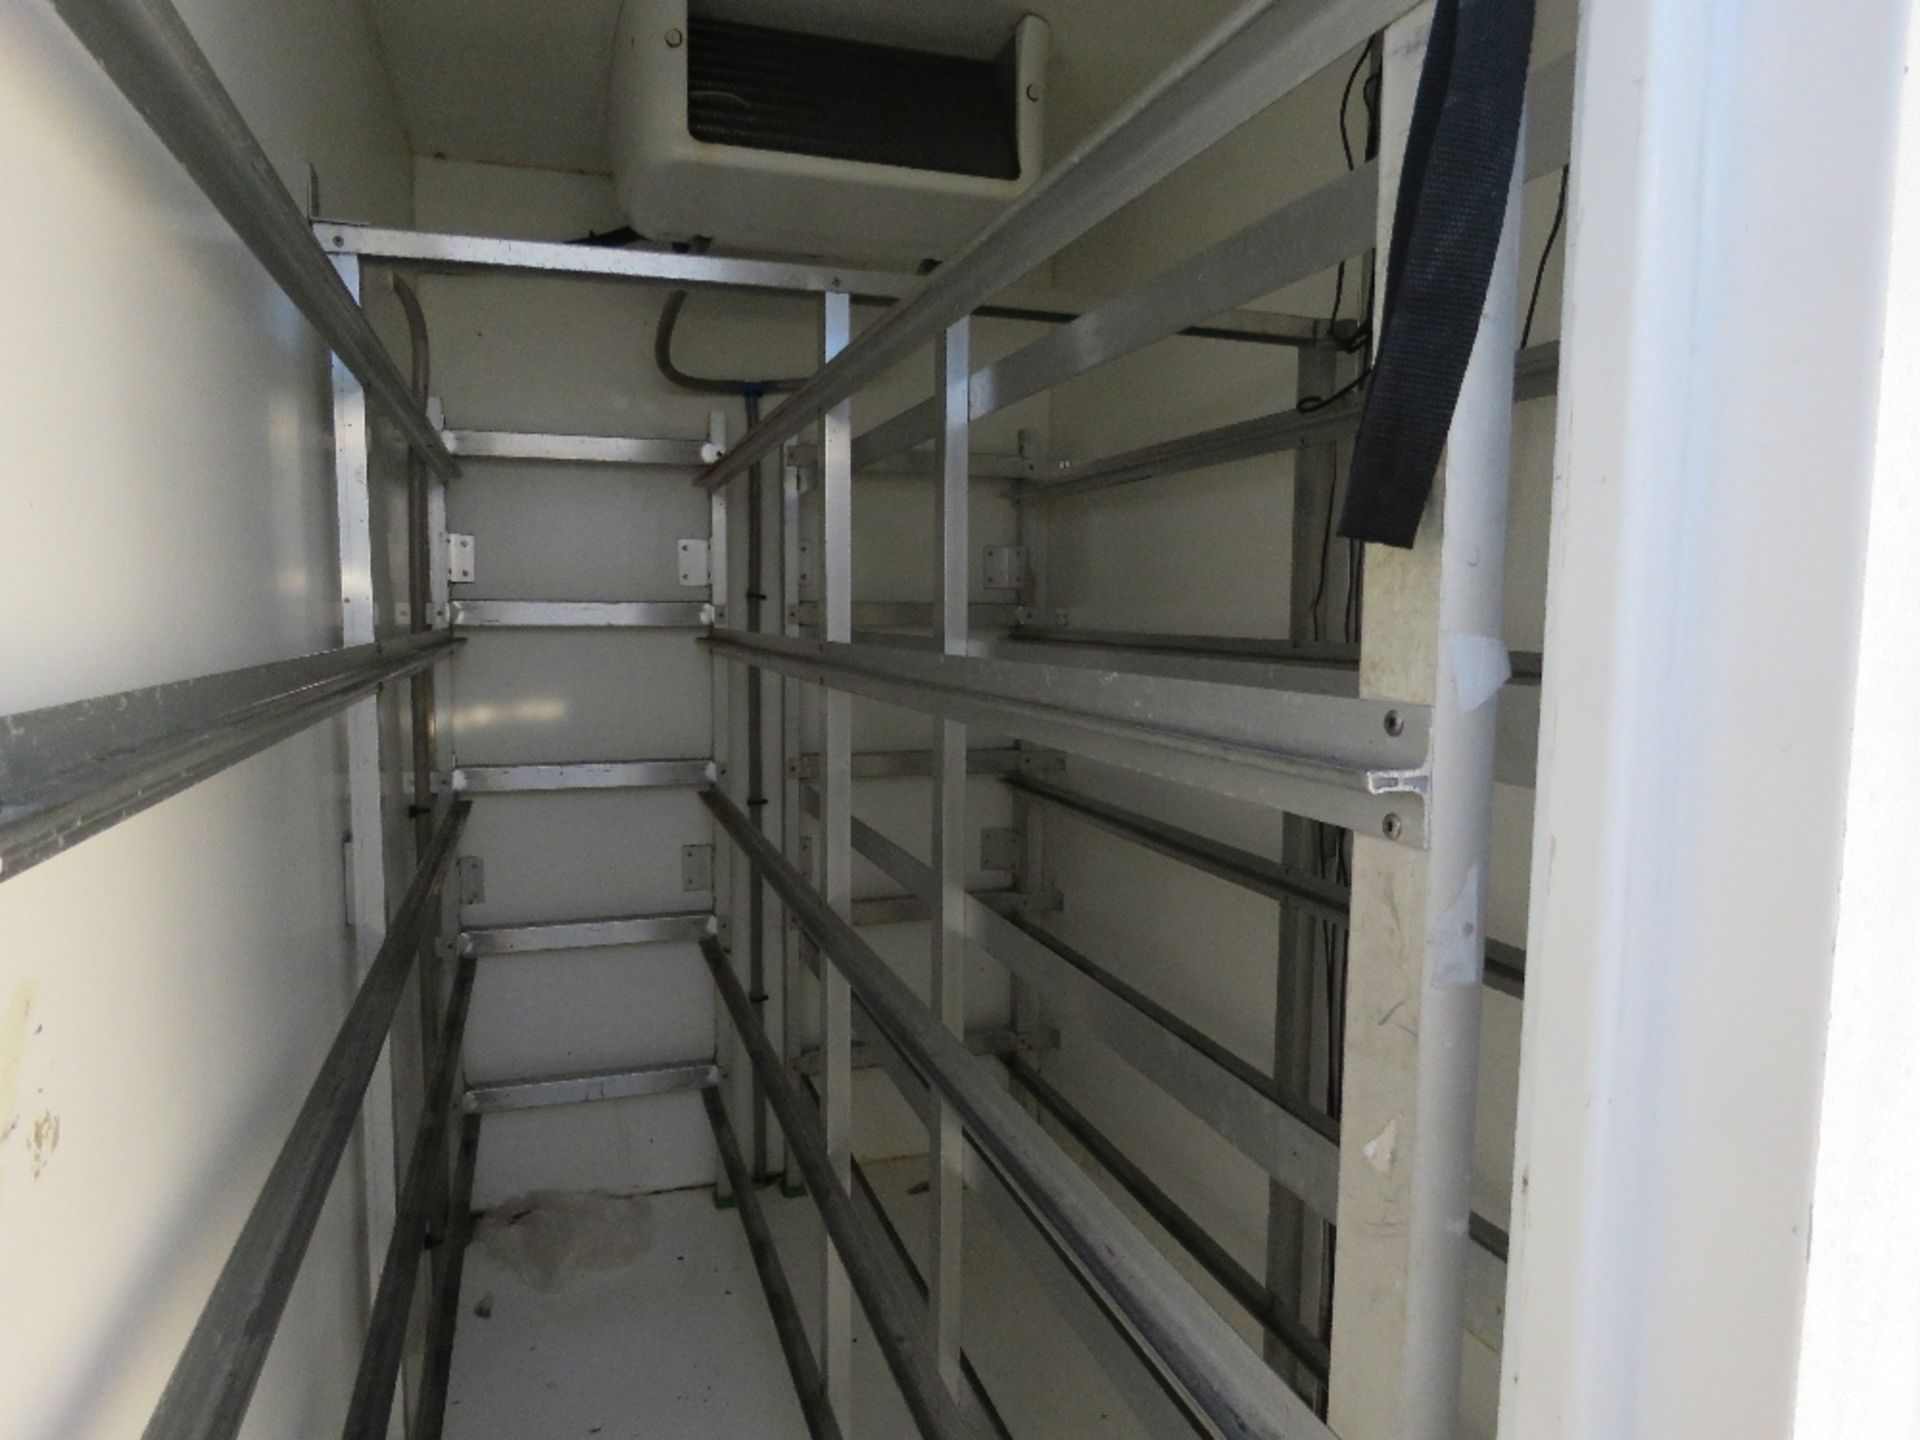 PANELTEX MULTI COMPARTMENT FRIDGE DELIVERY BODY, 12FT LENGTH APPROX. - Image 3 of 7